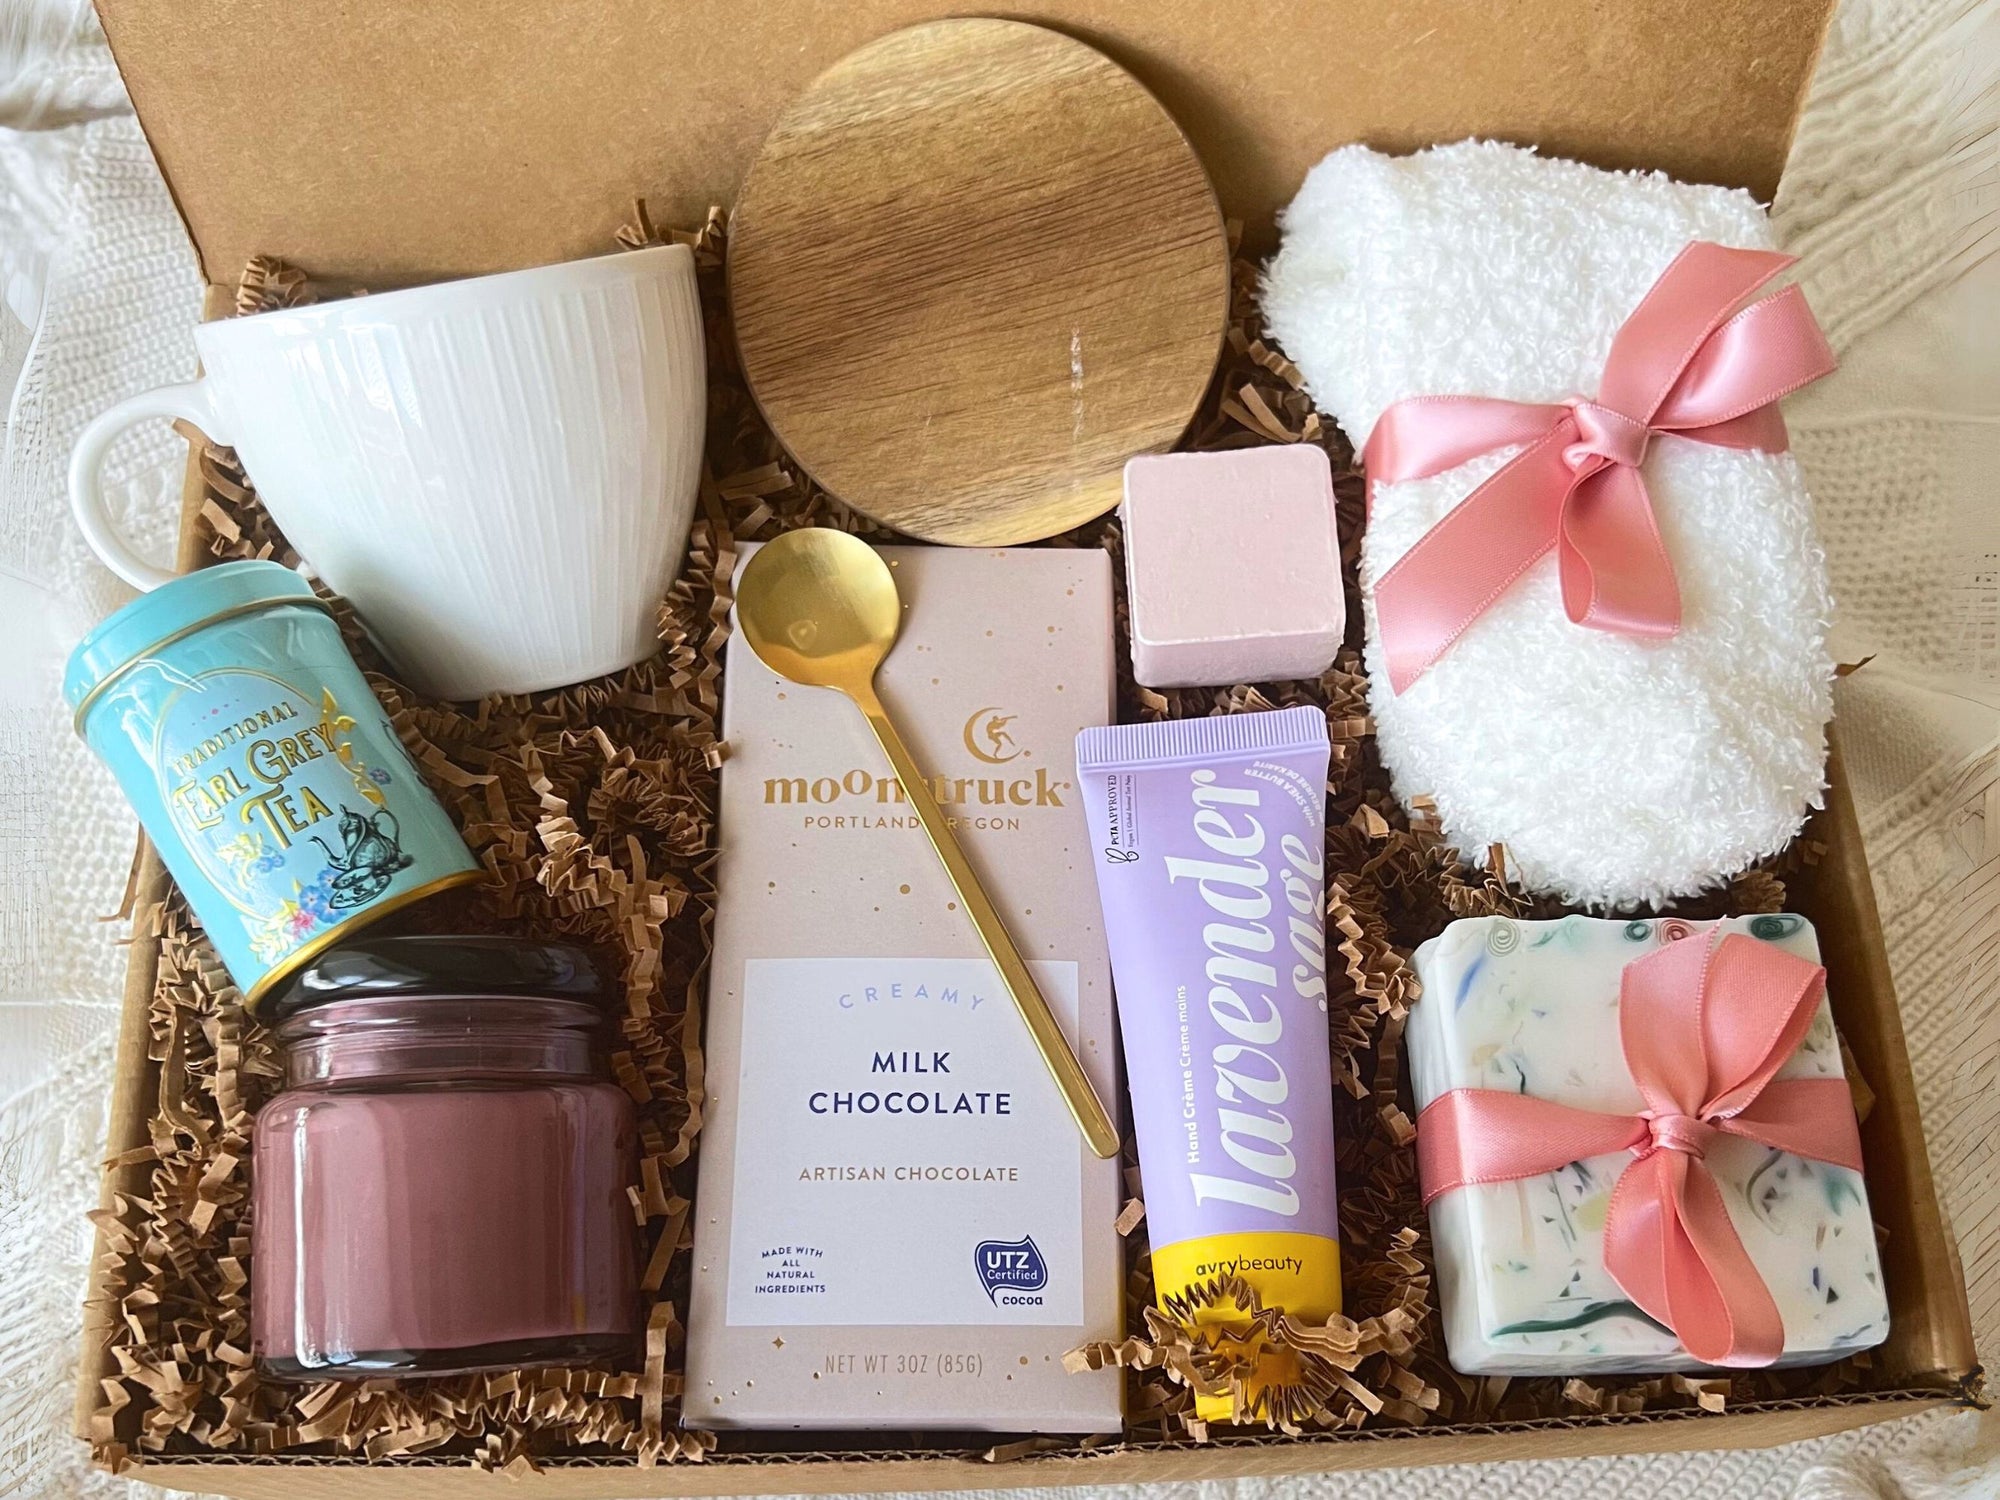 Ladies Gift Box | Gift for Mom, Sister, Mother-In-Law | Self Care Spa Gift Set for Her